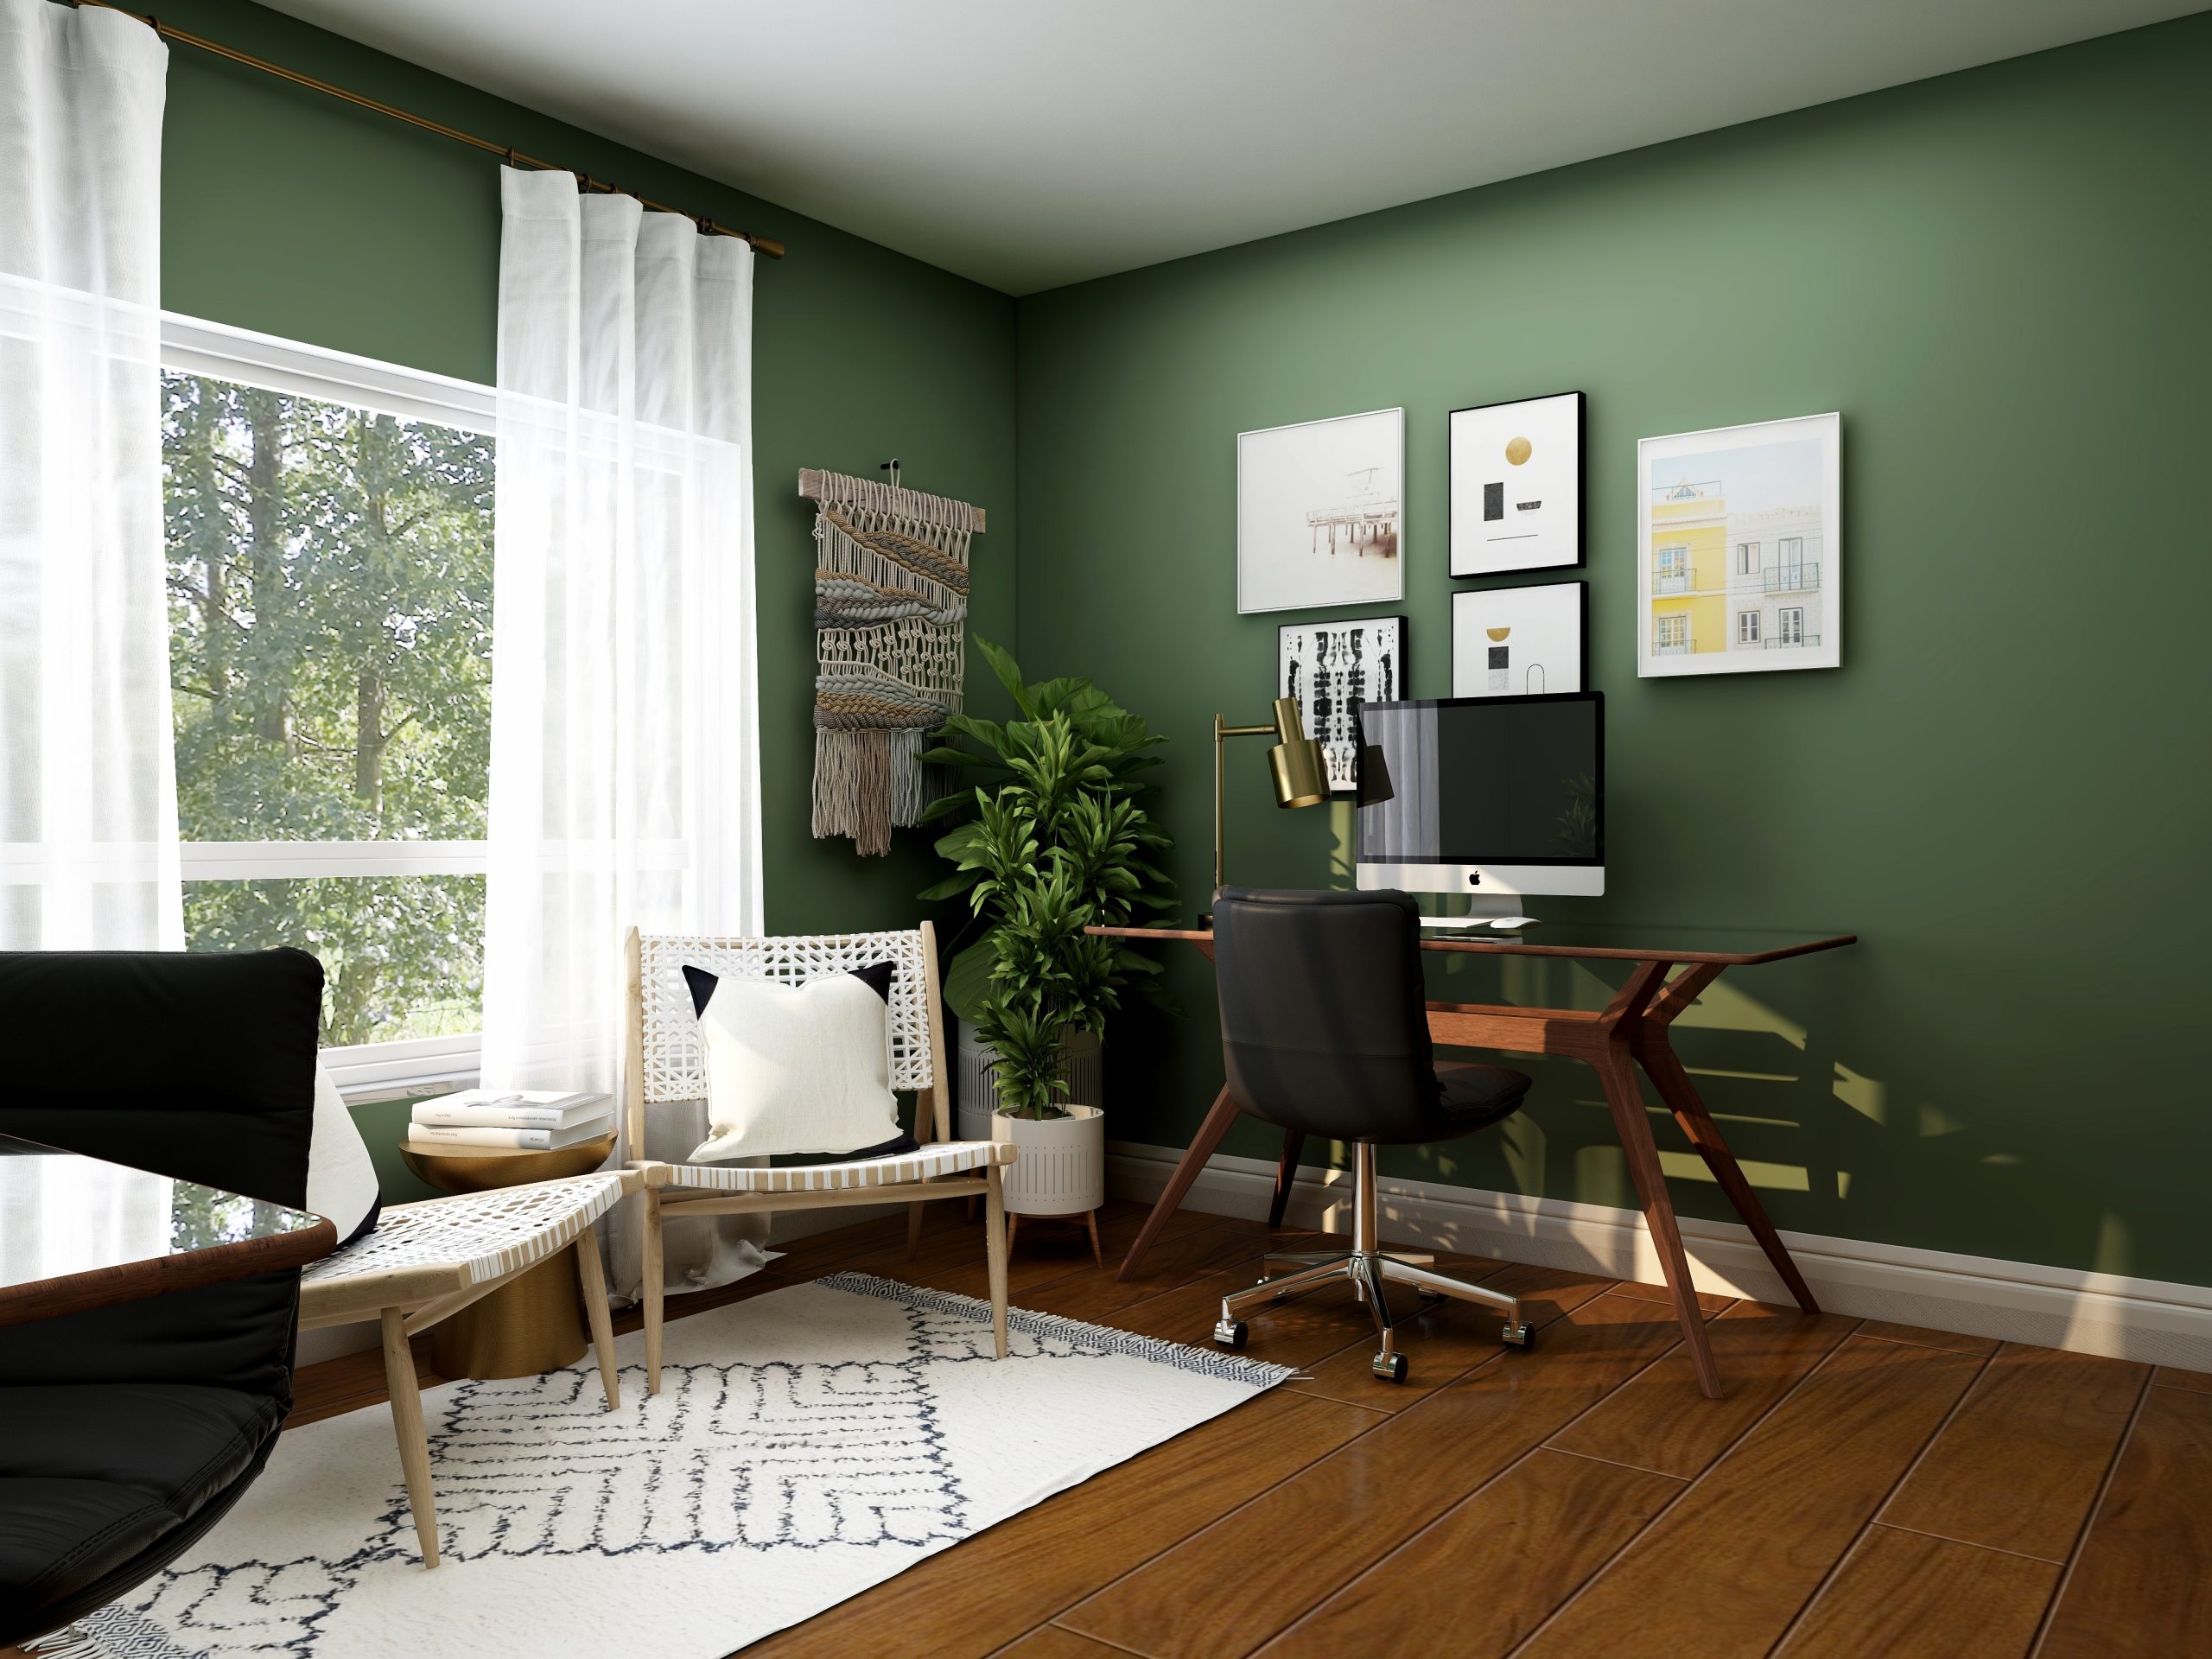 Transform Your Home Office With a Splash of Color - Marietta